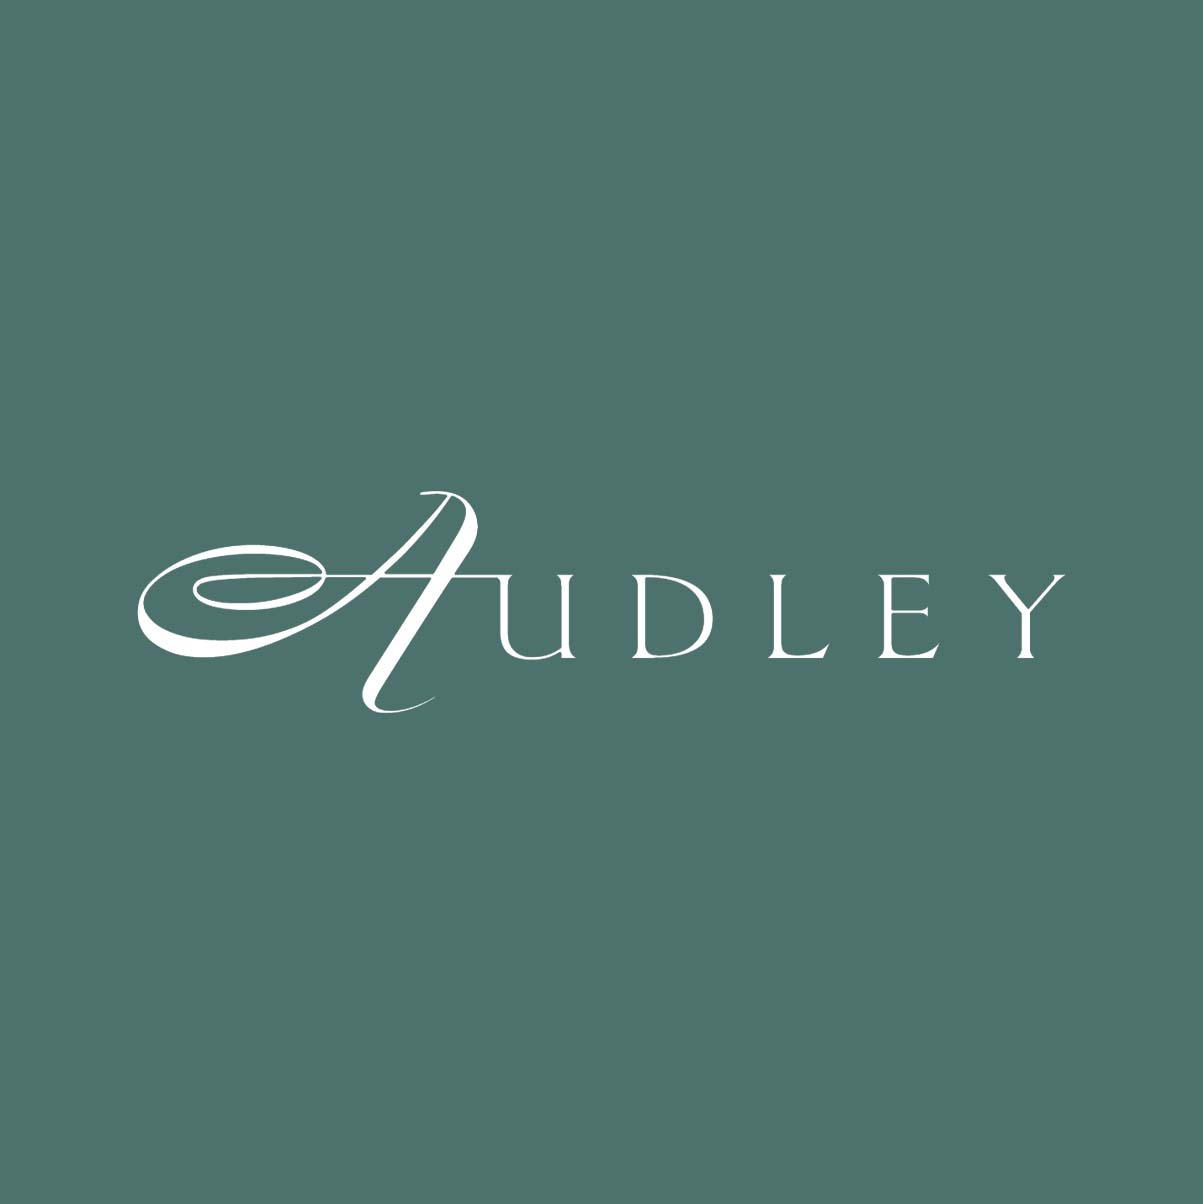 Audley travel